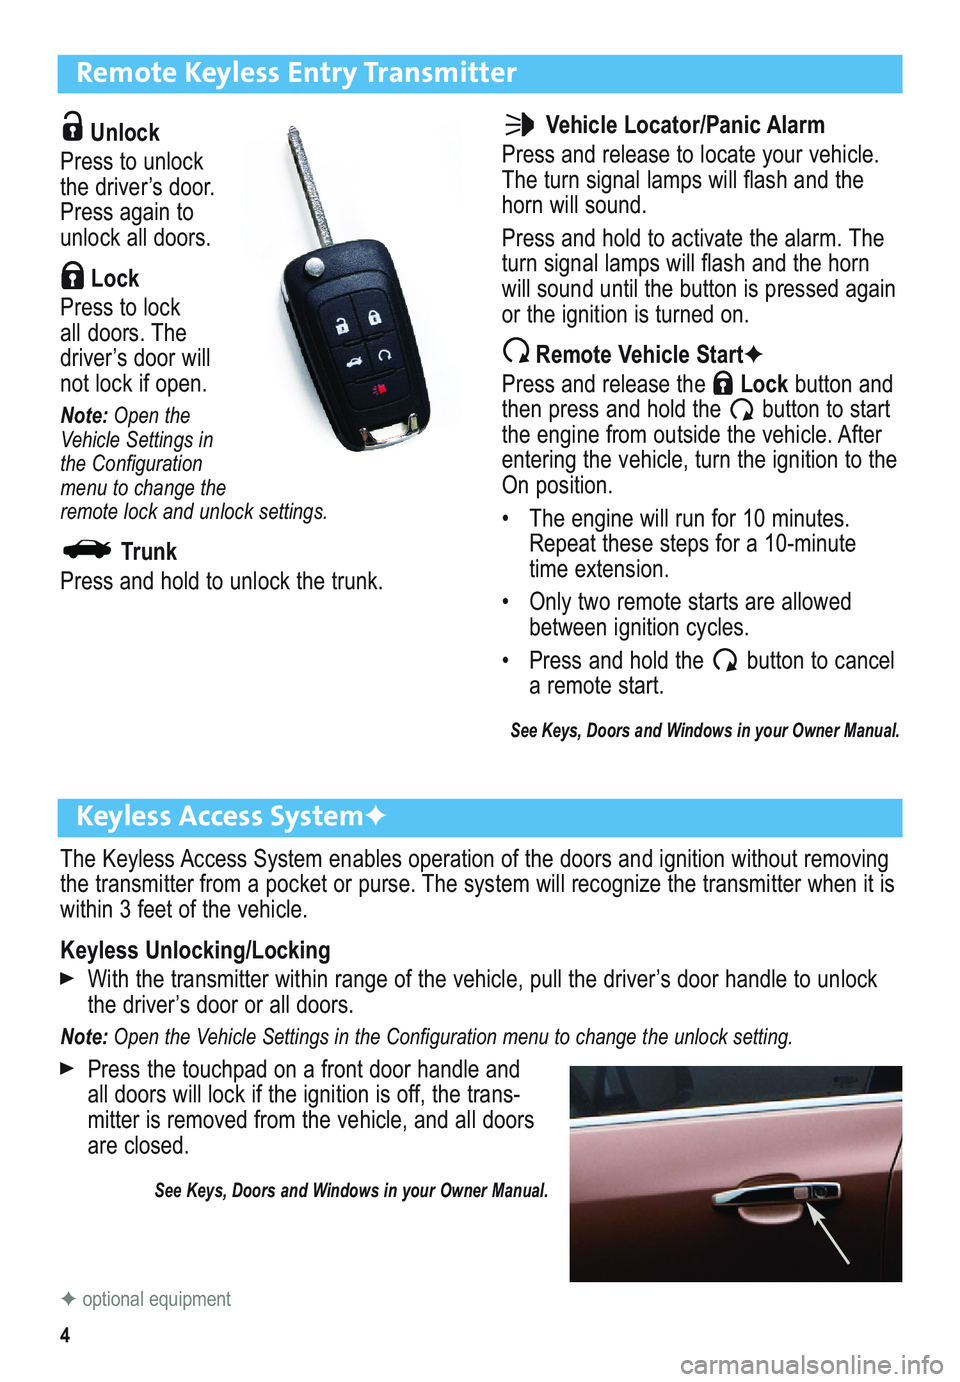 BUICK VERANO 2012  Get To Know Guide 4
Remote Keyless Entry Transmitter
Unlock 
Press to unlock
the  driver’s door.
Press again to
unlock all doors.
Lock 
Press to lock 
all doors. The 
driver’s door will
not lock if open. 
Note:Open